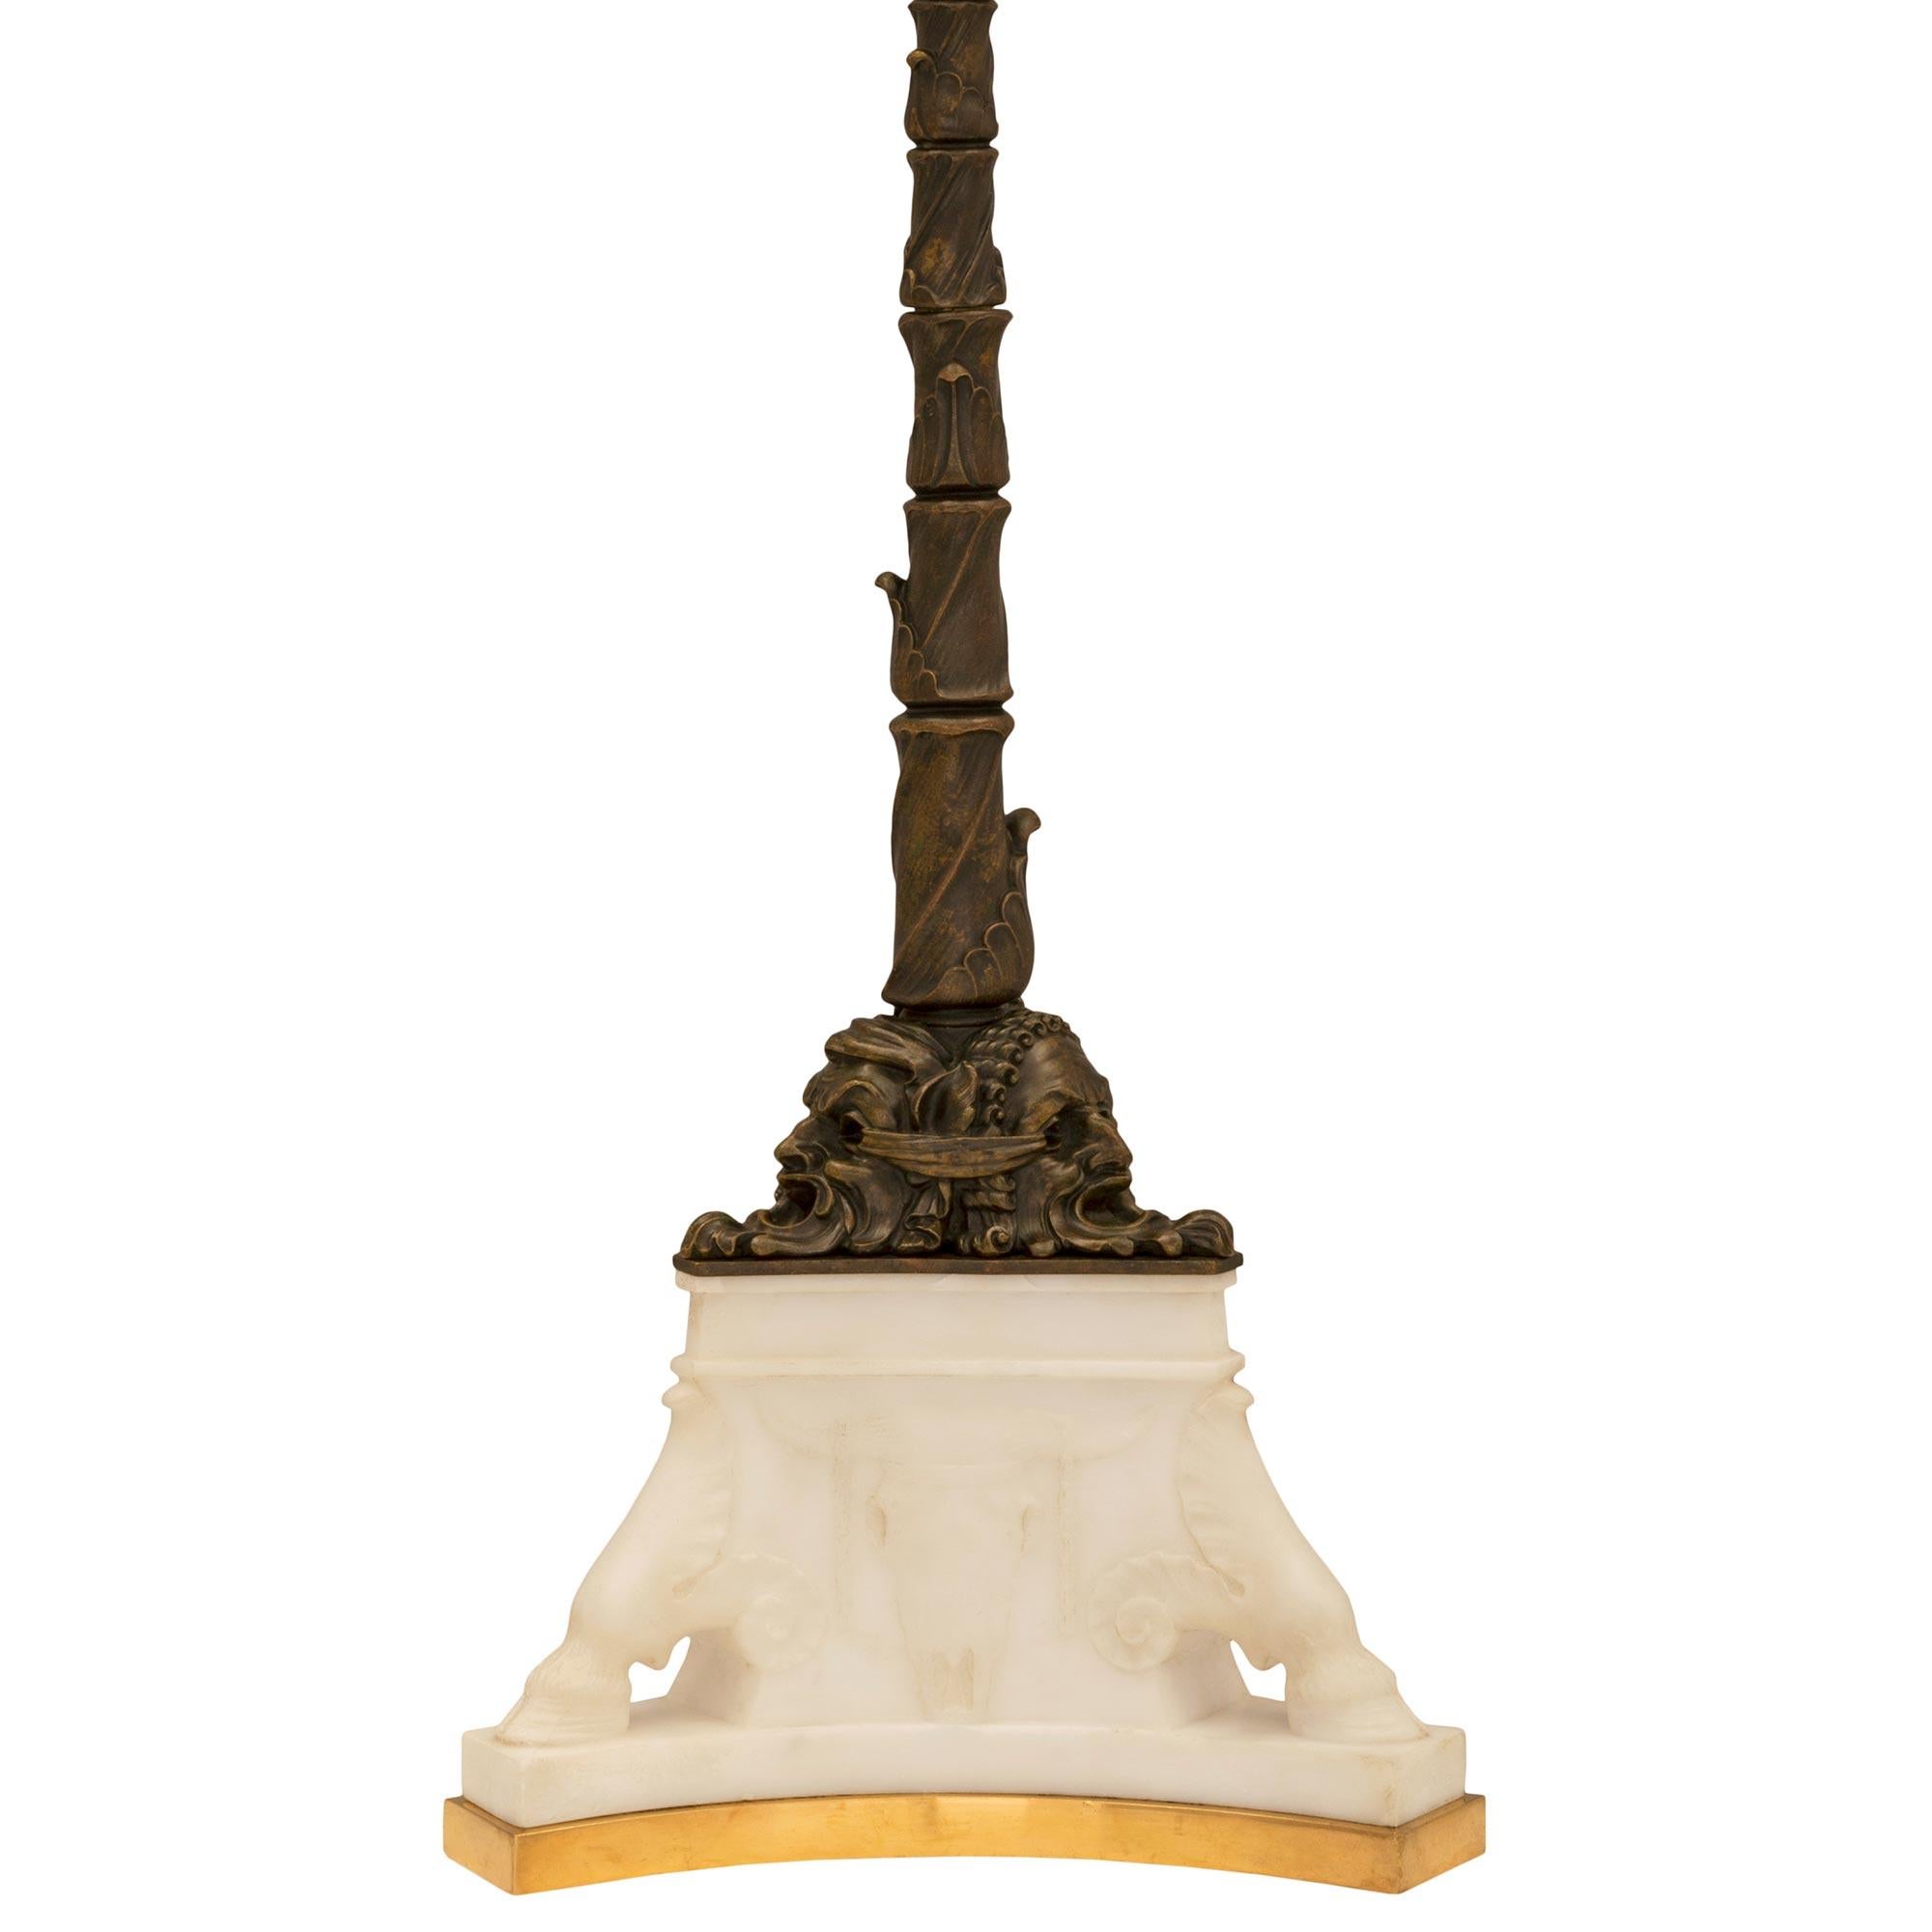 An impressive and unique American 19th century neo-classical st. ormolu, patinated bronze and white Carrara marble lamp signed Caldwell. The lamp is raised by a fine ormolu base with concave sides below the striking triangular shaped white Carrara